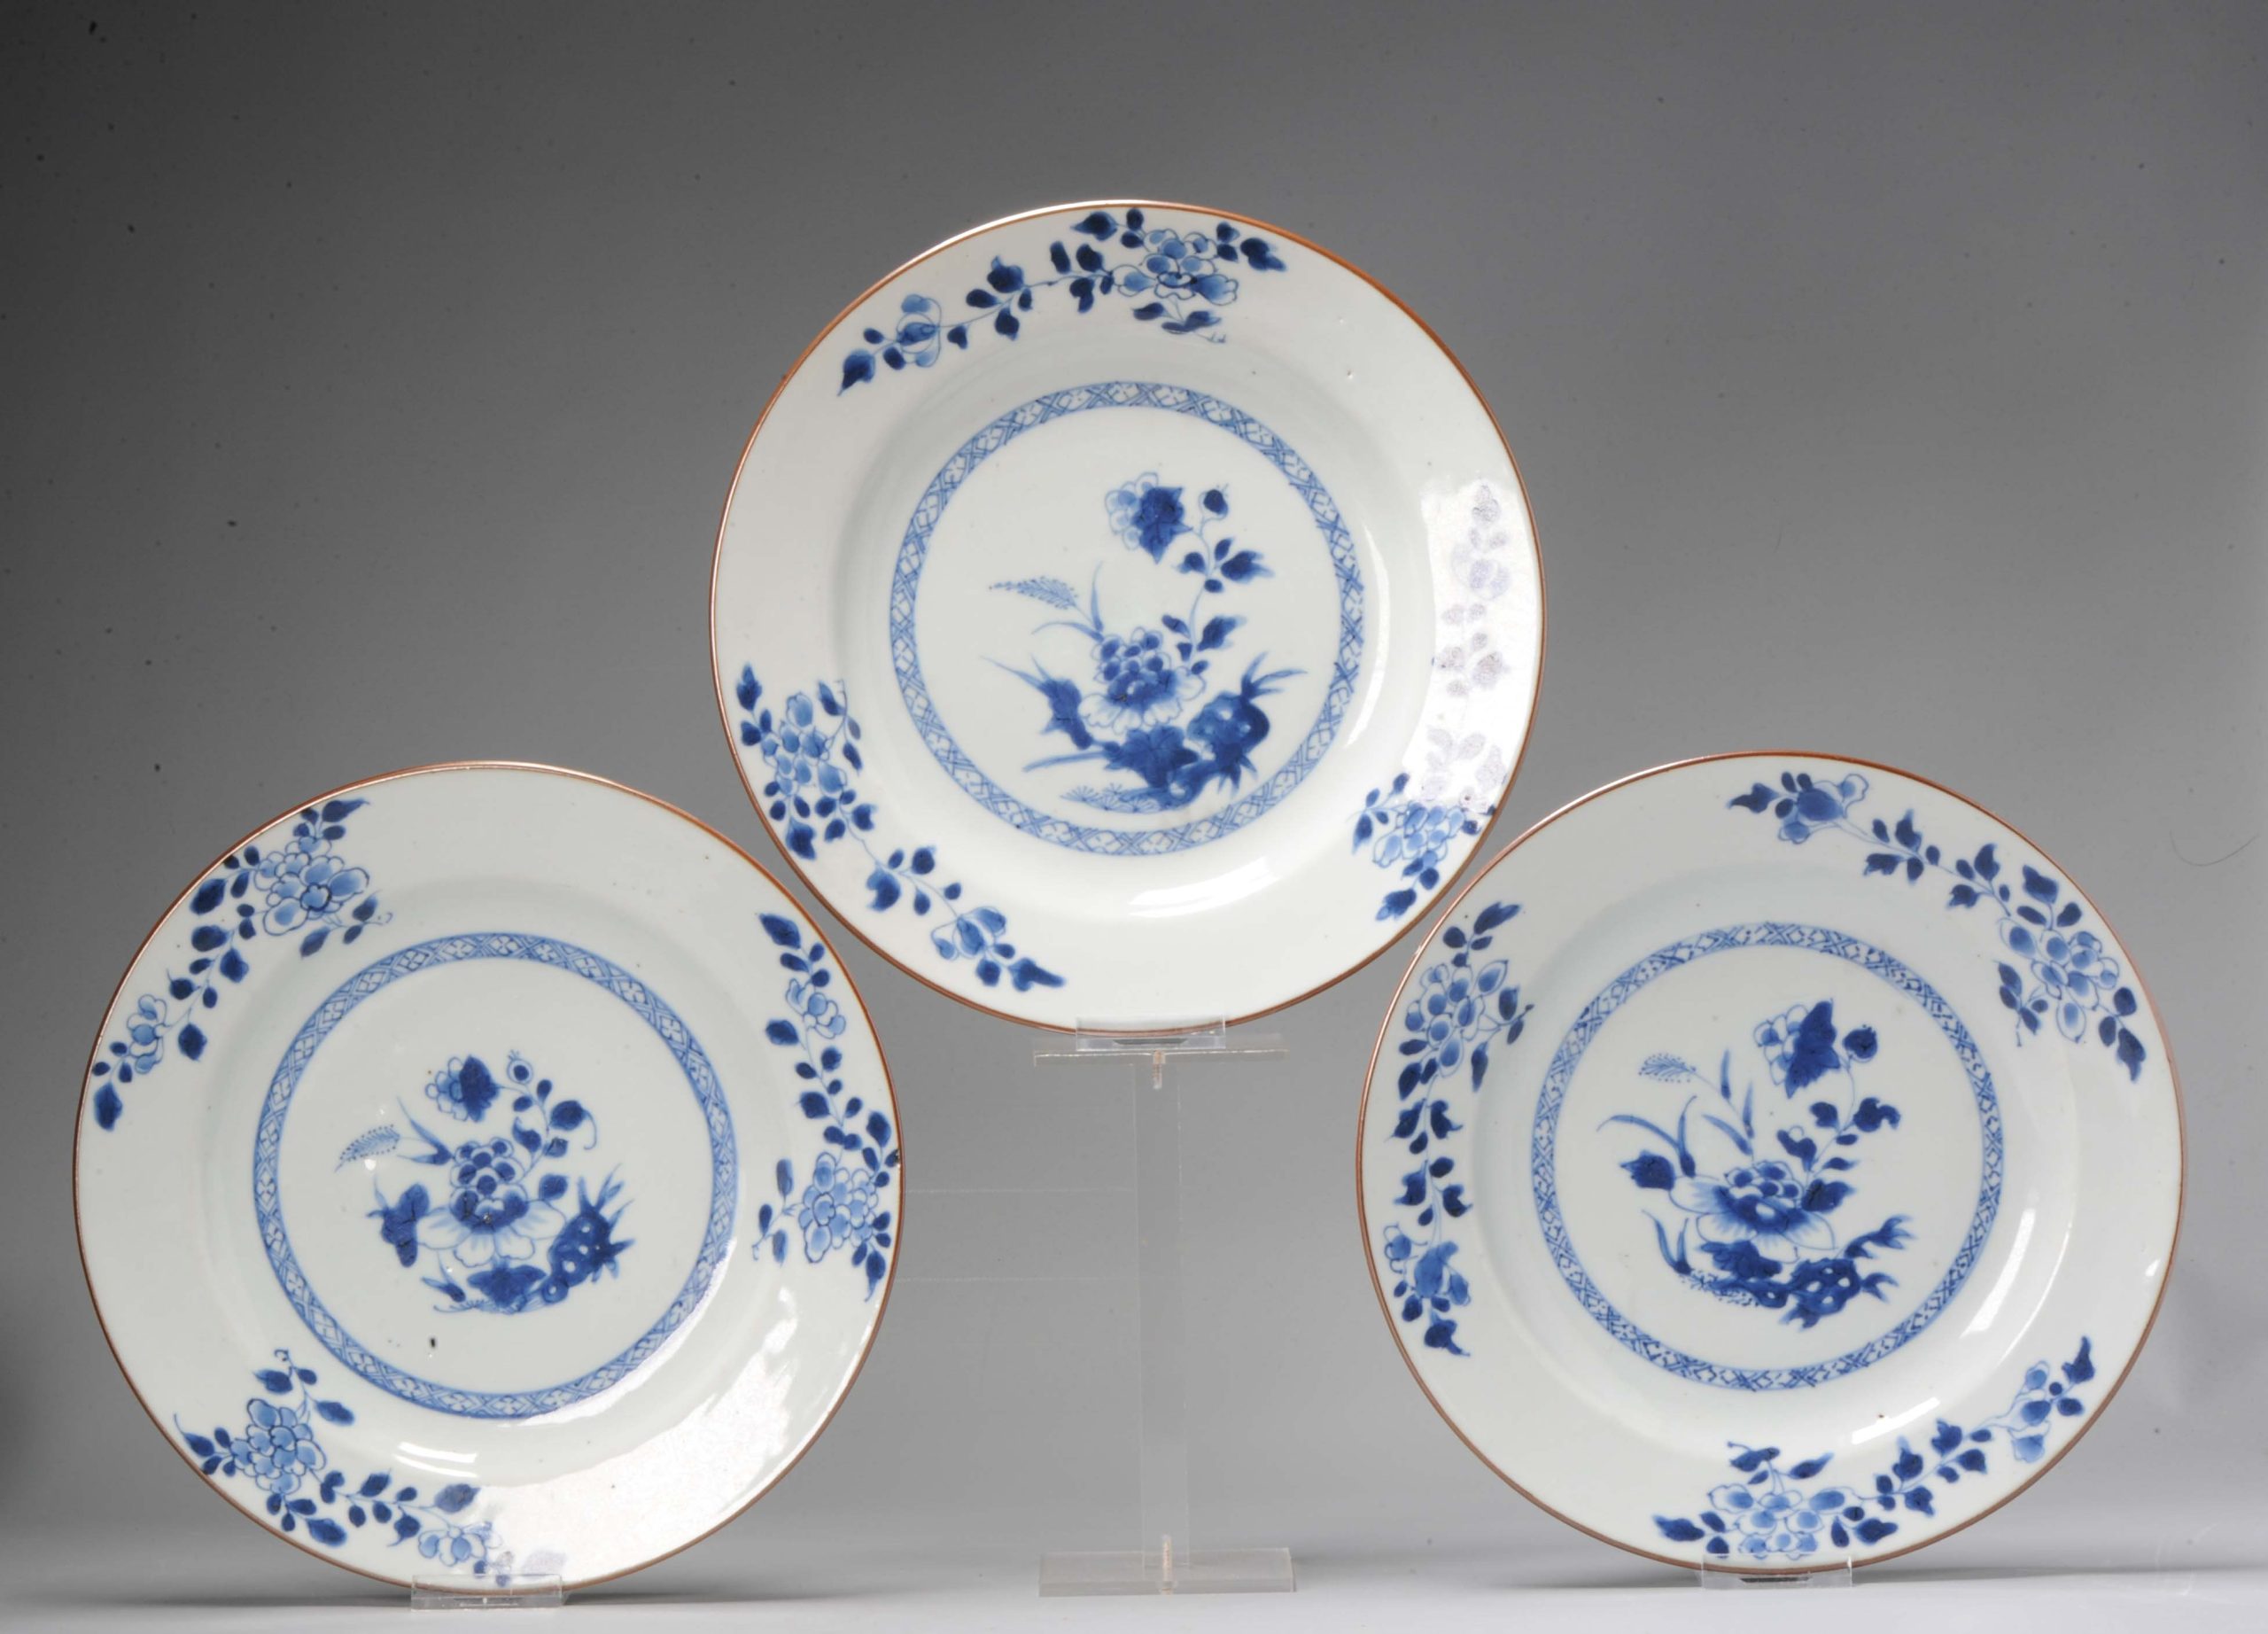 A Dinner Set of Yongzheng period Chinese porcelain floral dinner Plates China